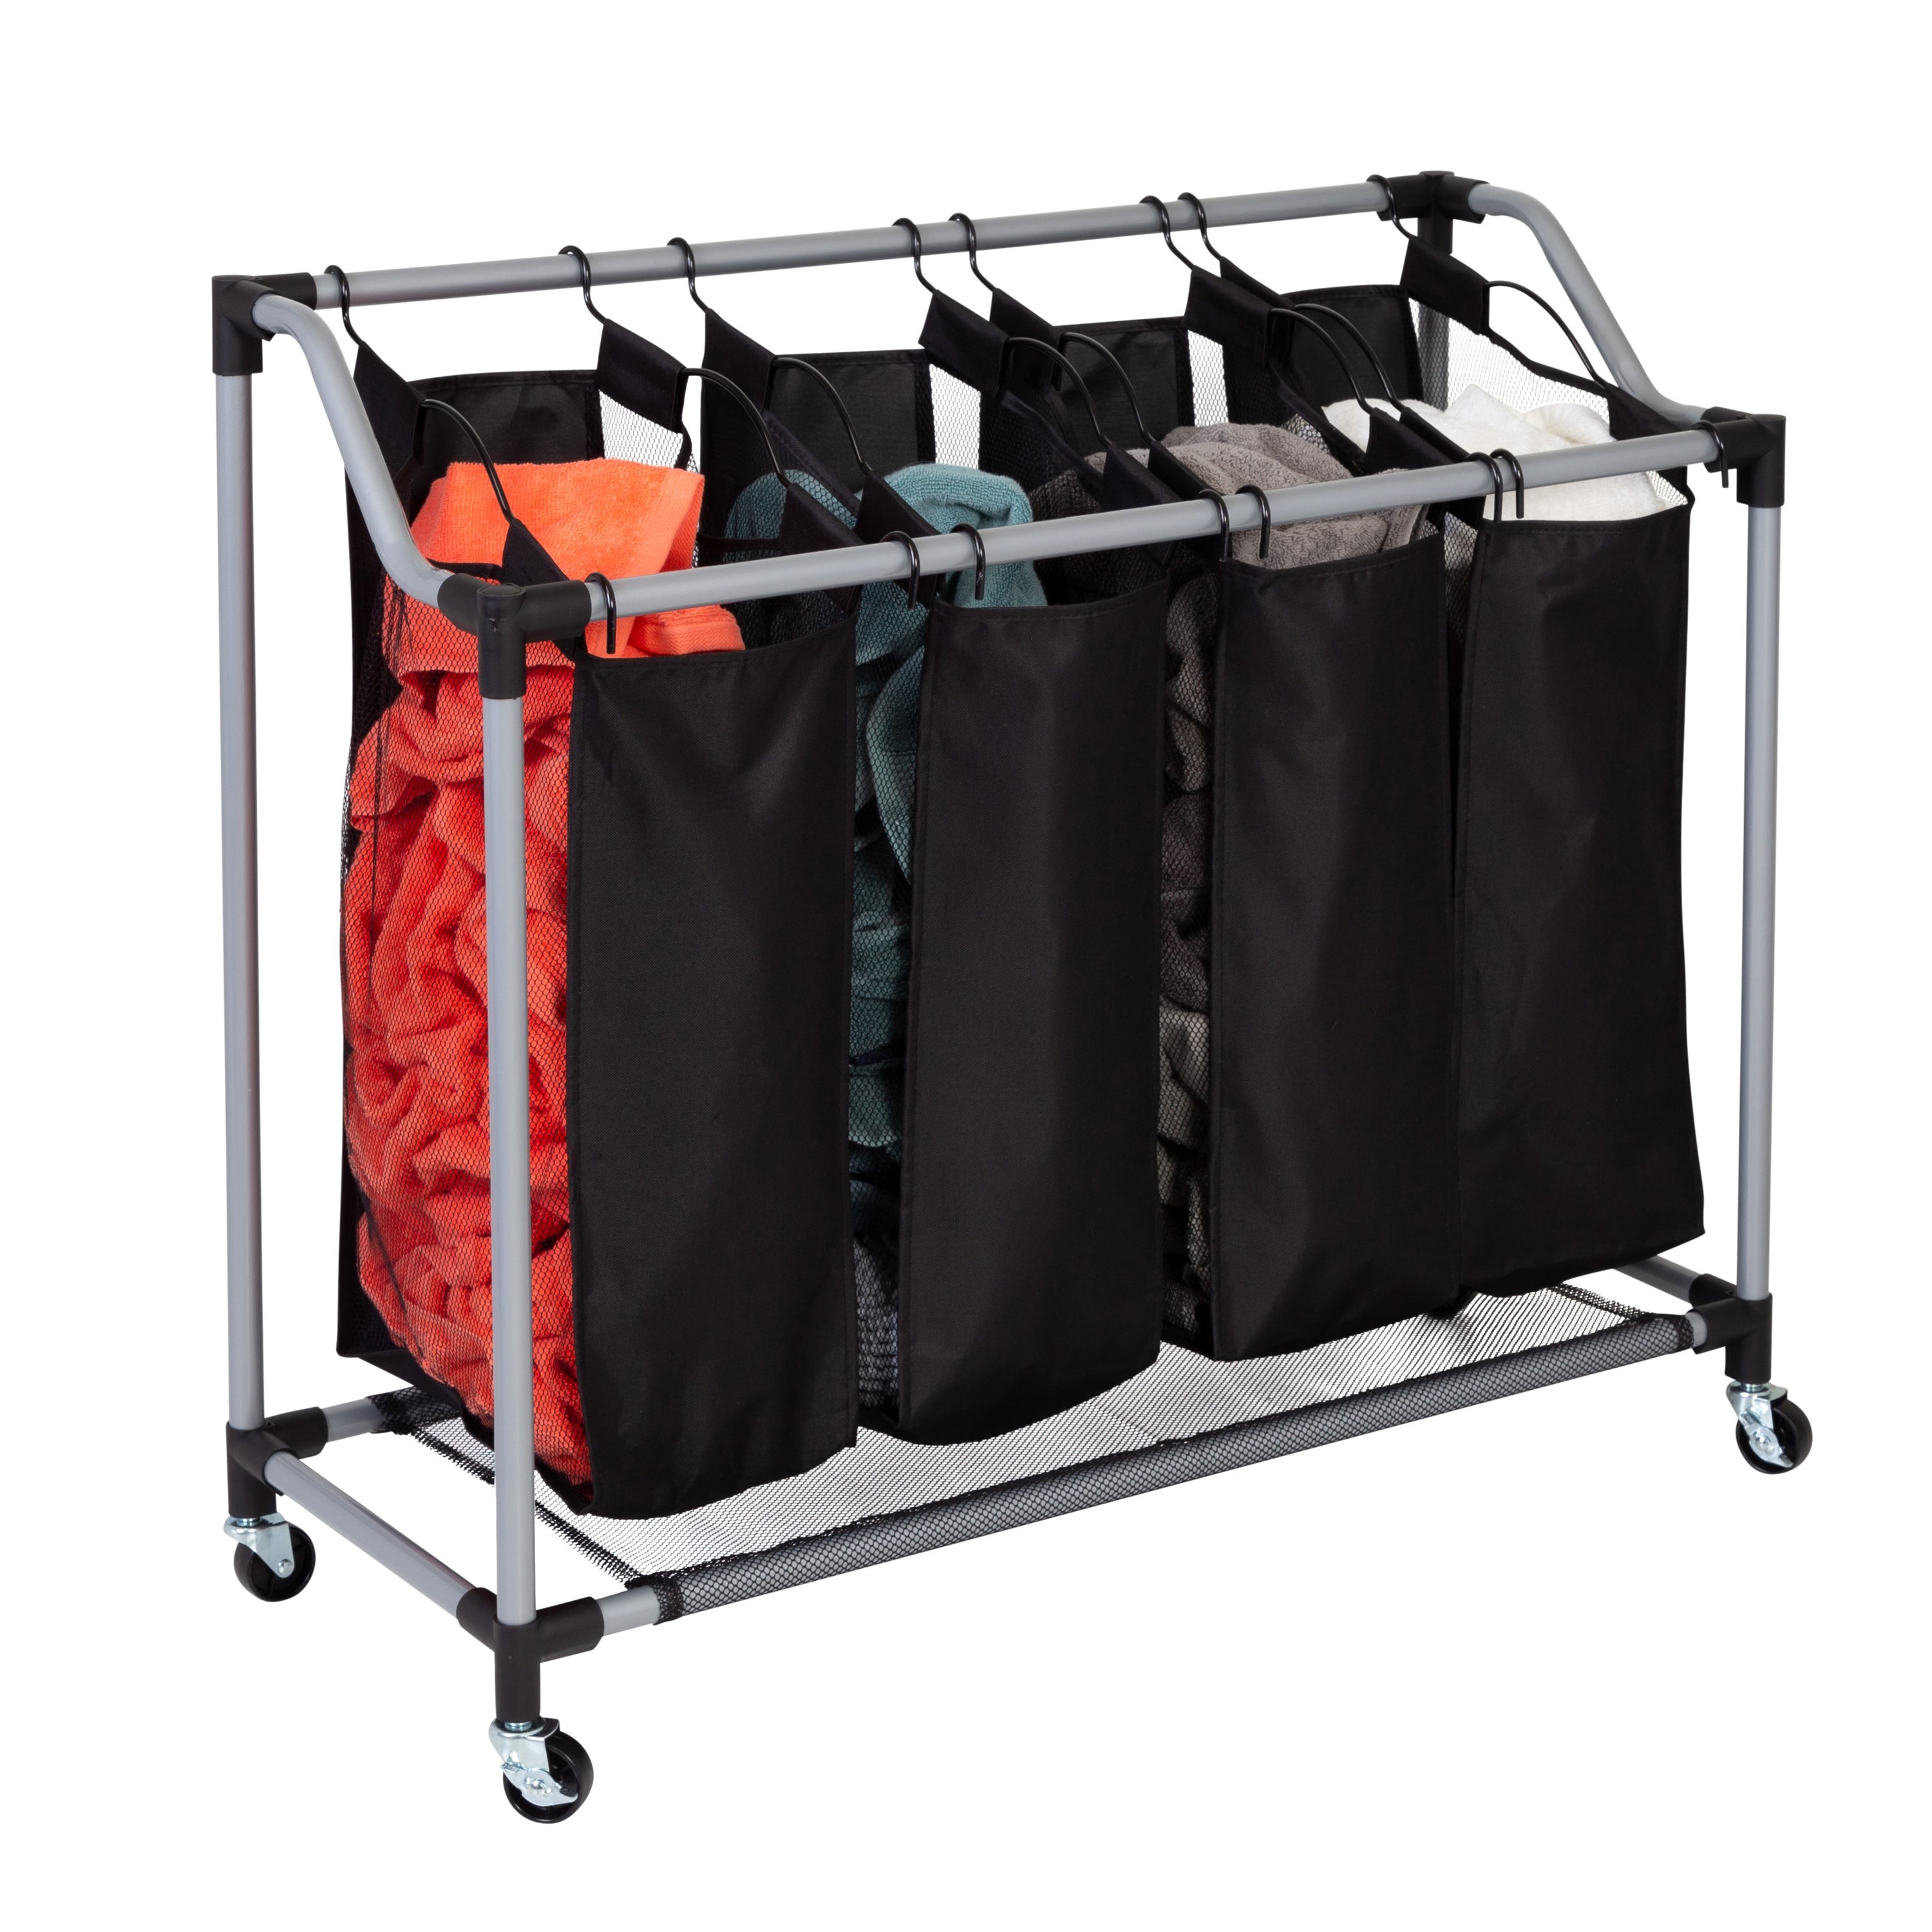 Rolling Deluxe 4-Compartment Laundry Sorter Black/Silver